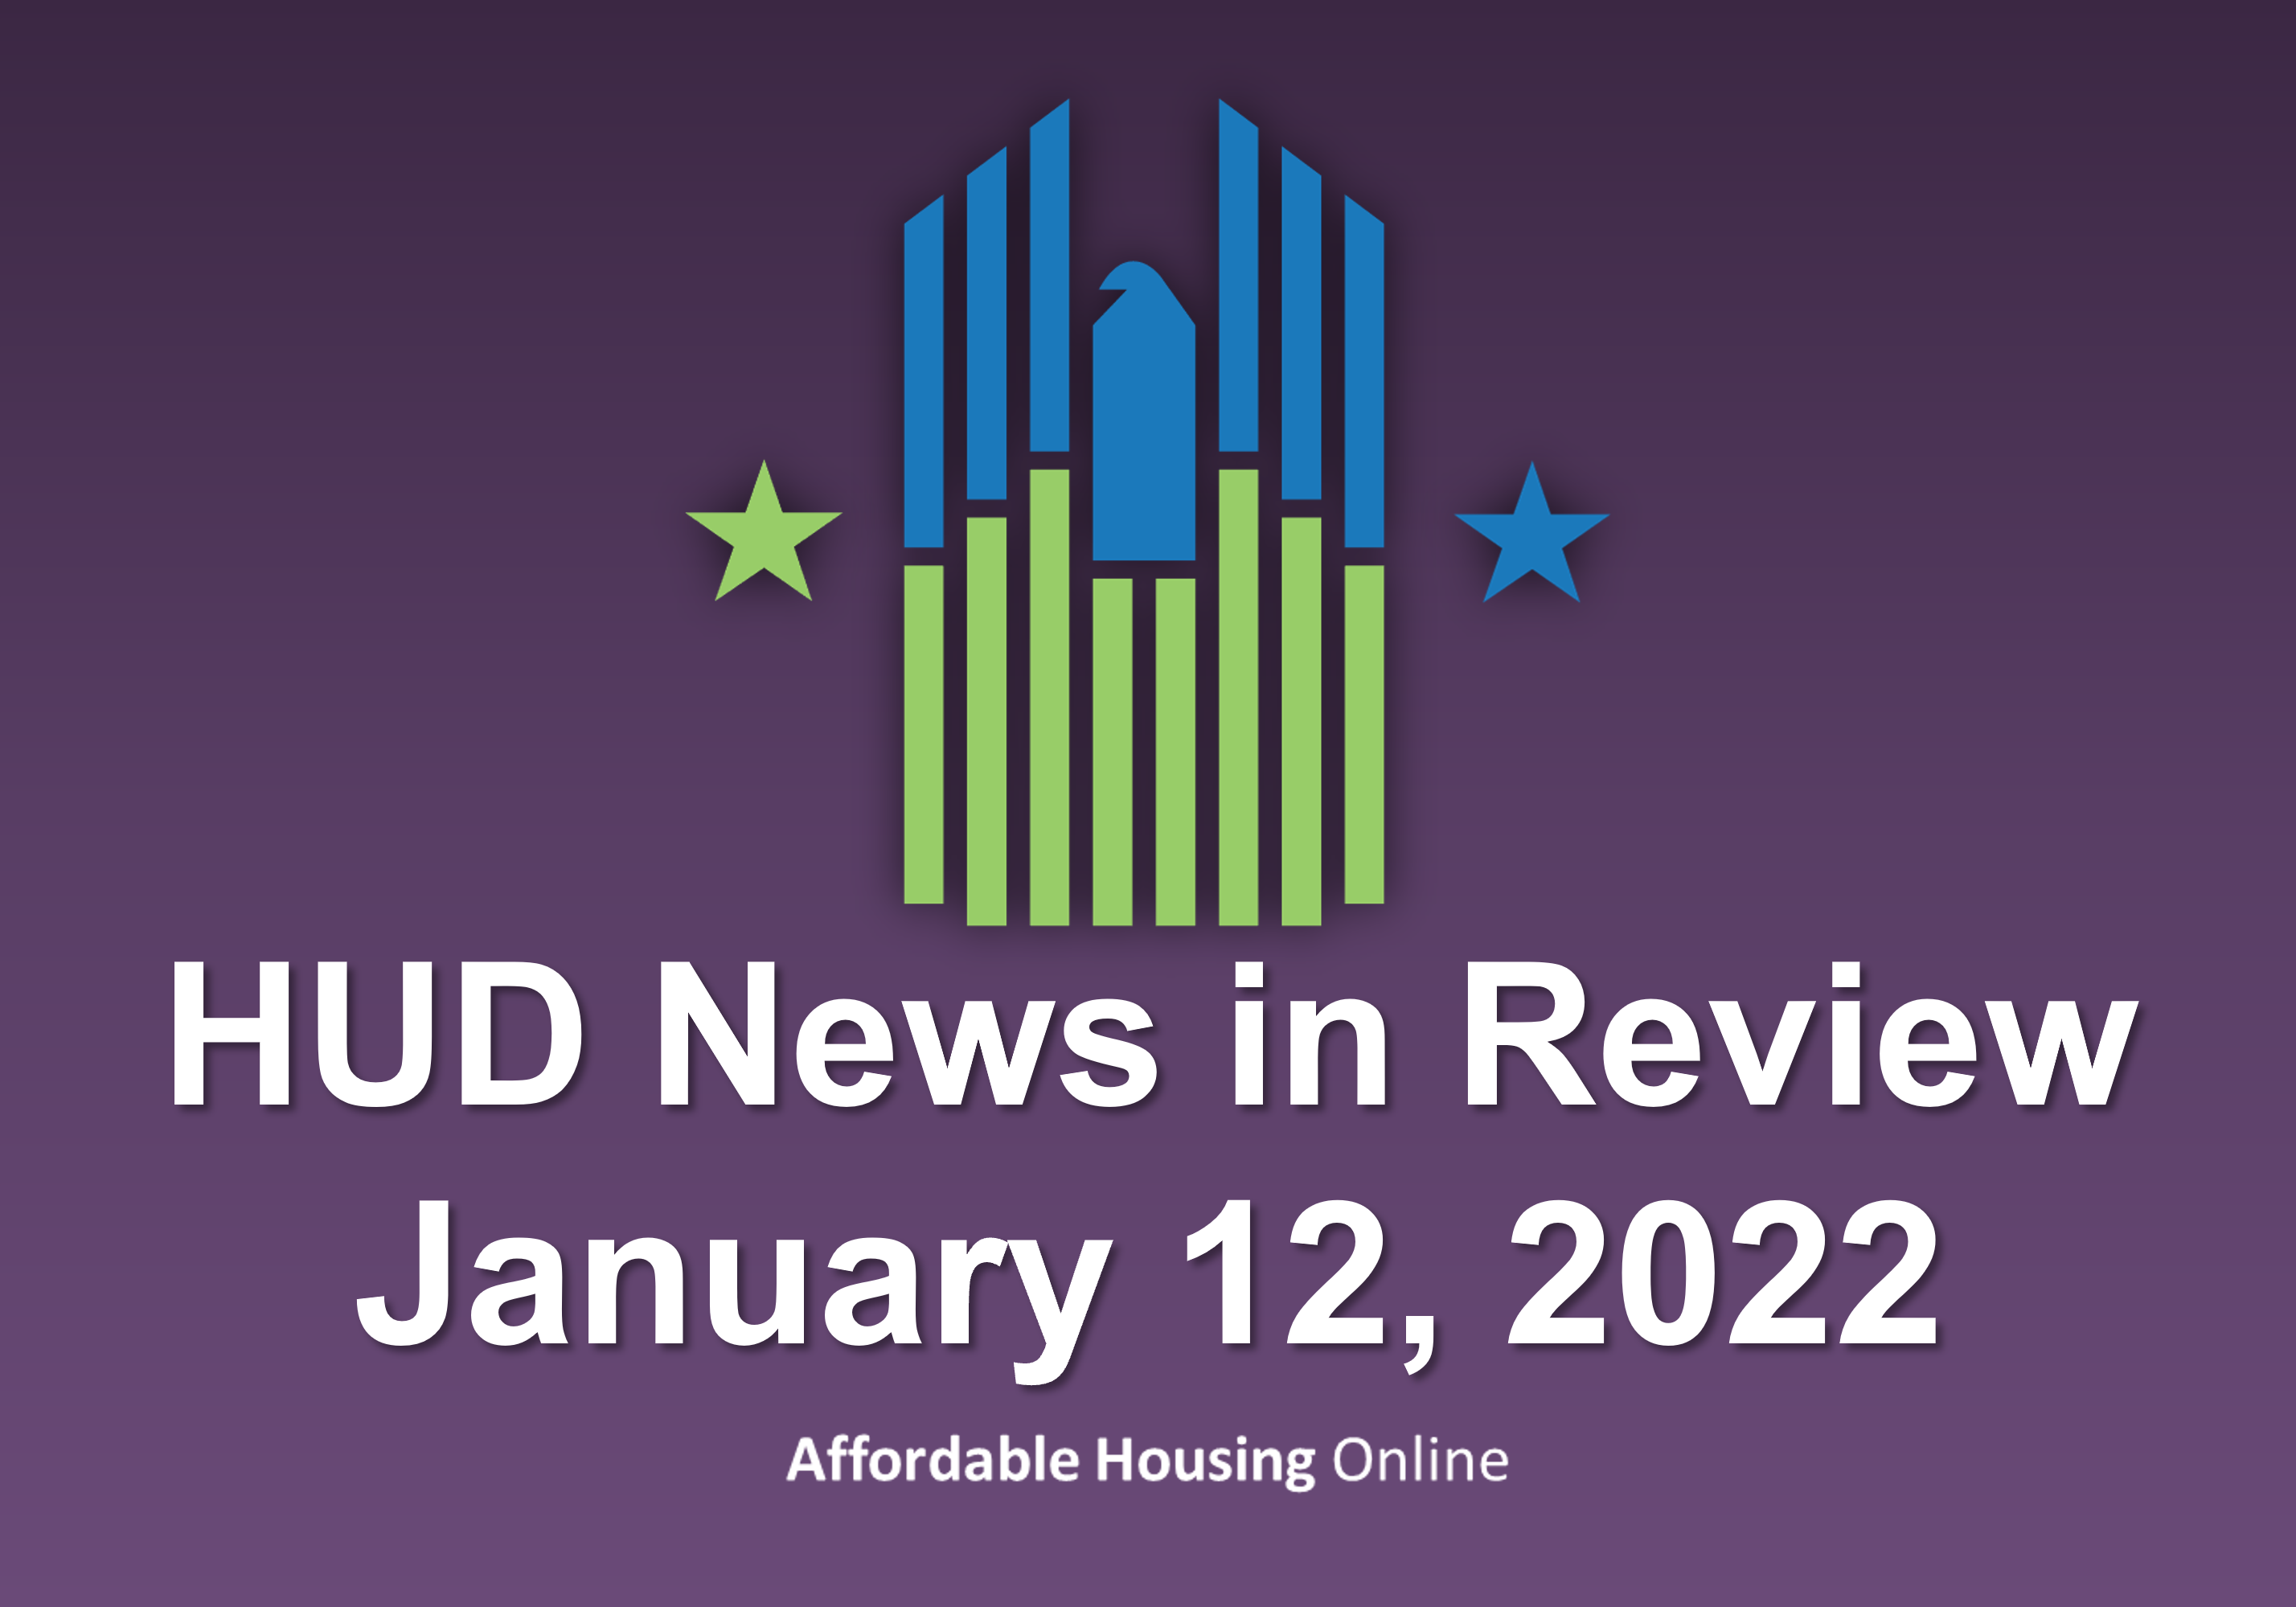 HUD News in Review banner image for January 12, 2022